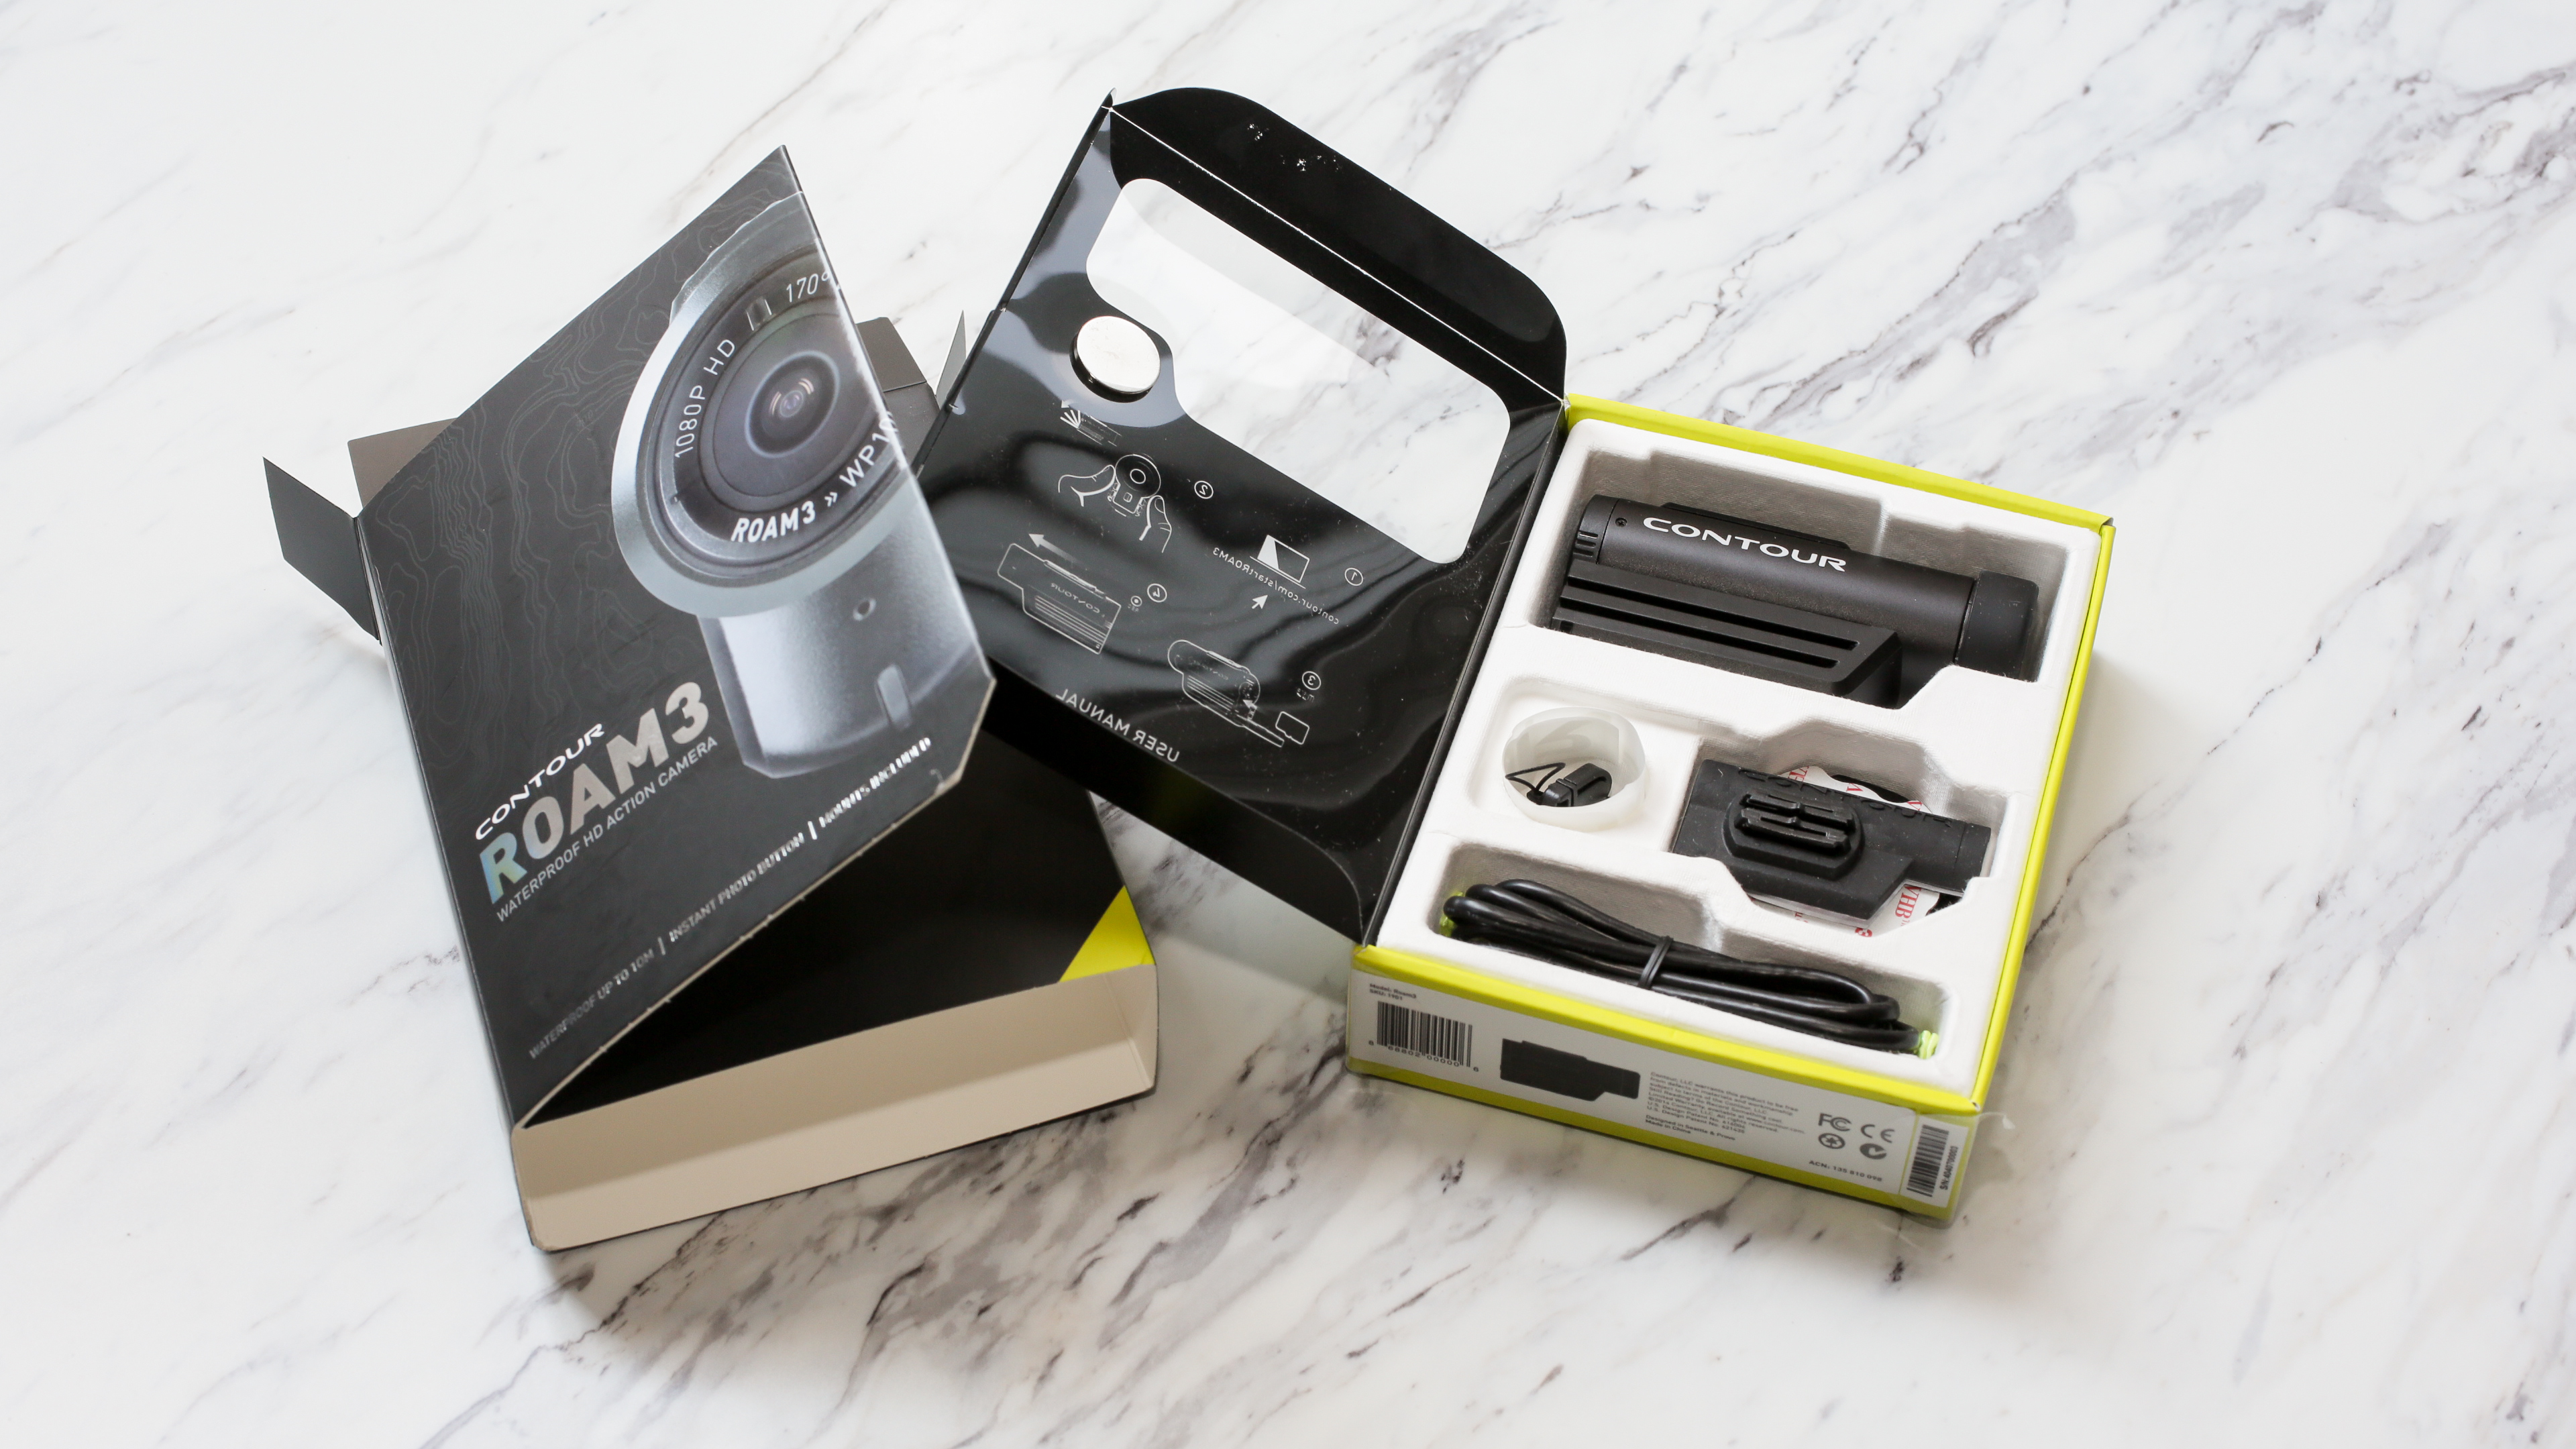 Contour Roam3 review: One of the top entry-level action cams gets